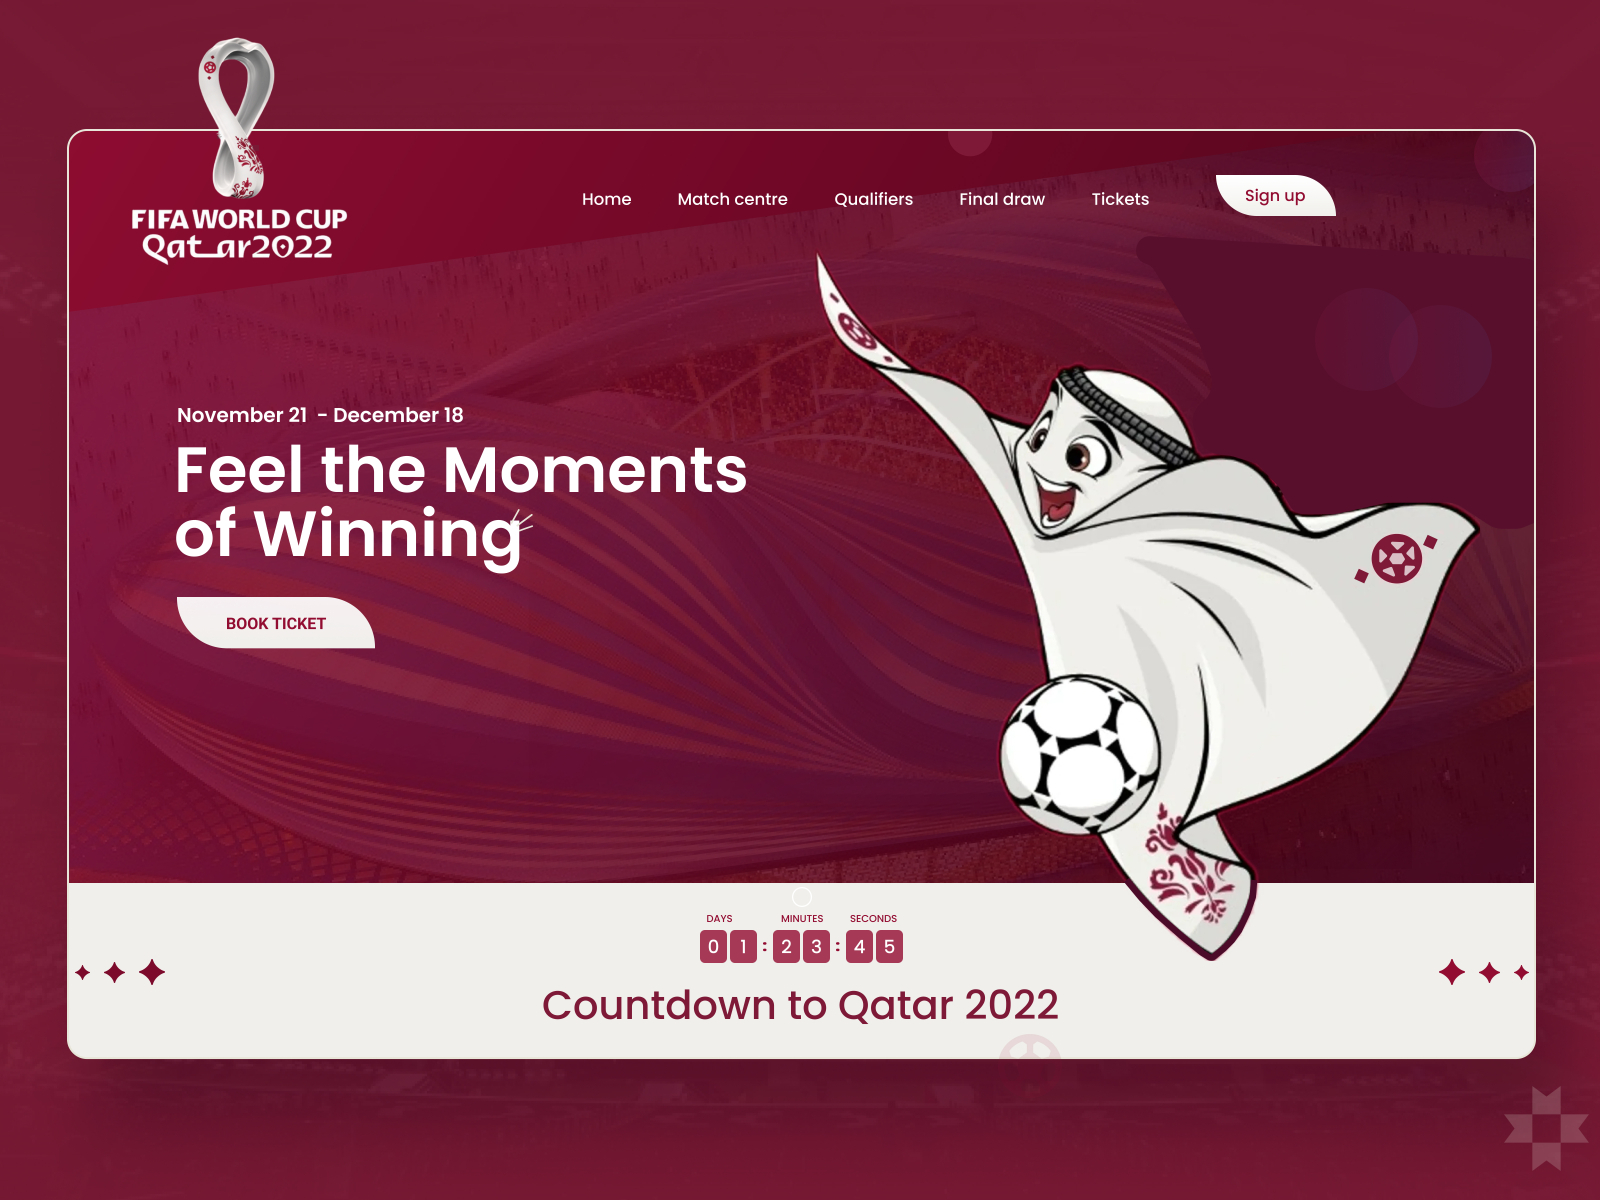 Fifa World Cup 2022 II Tickets booking site by Razin hasnat on Dribbble